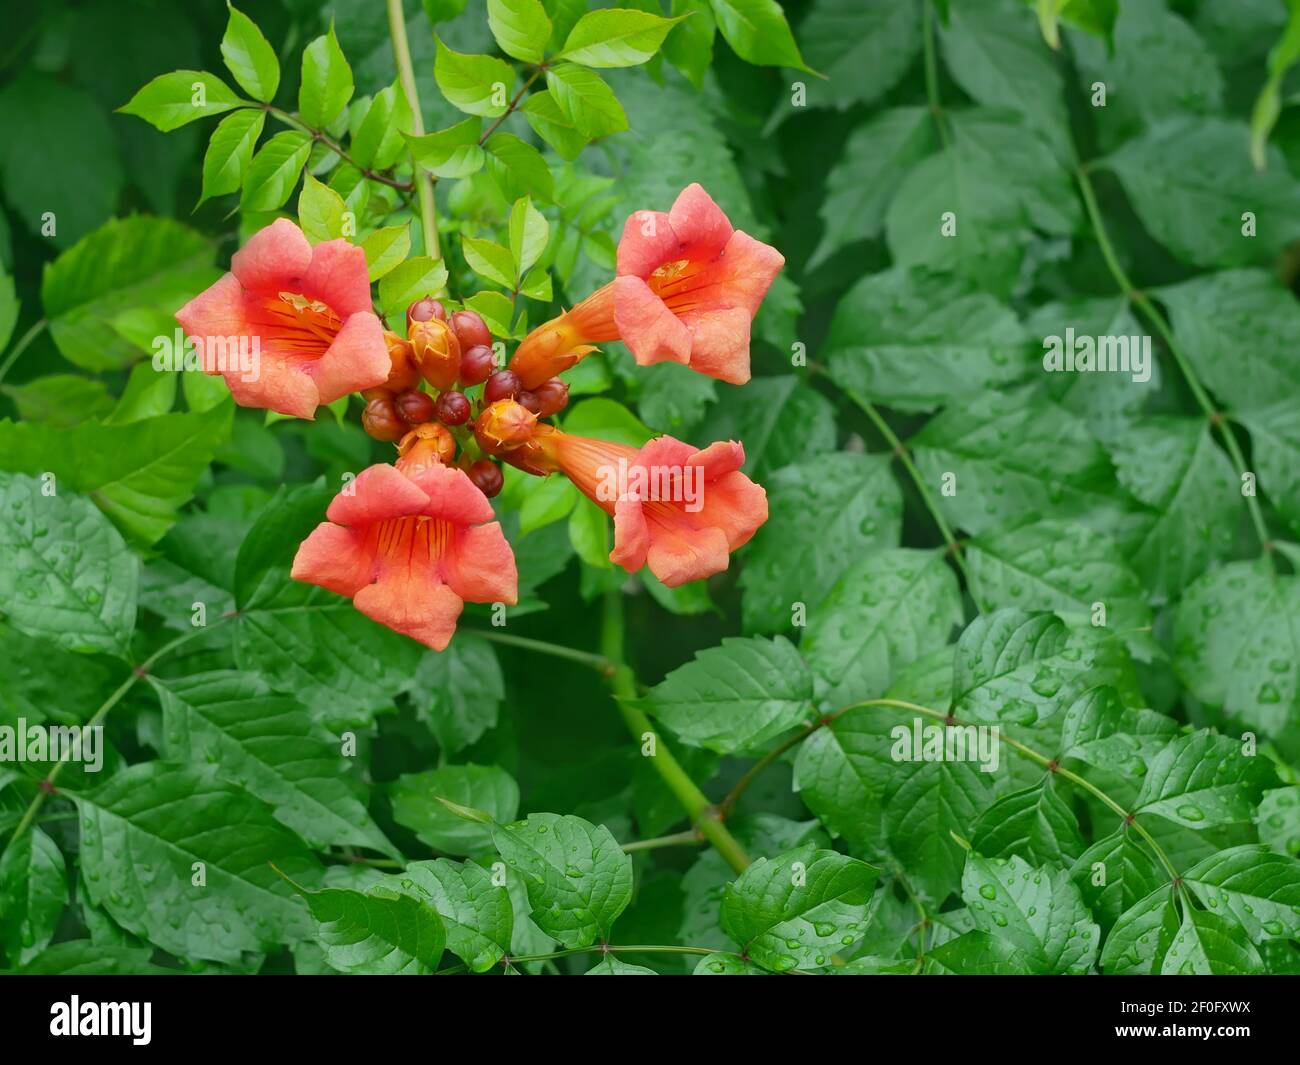 Plant with stems that take root, Campsis radicans flowering with big orange flowers,  common names: trumpet creeper, or cow itch vine, or hummingbird Stock Photo